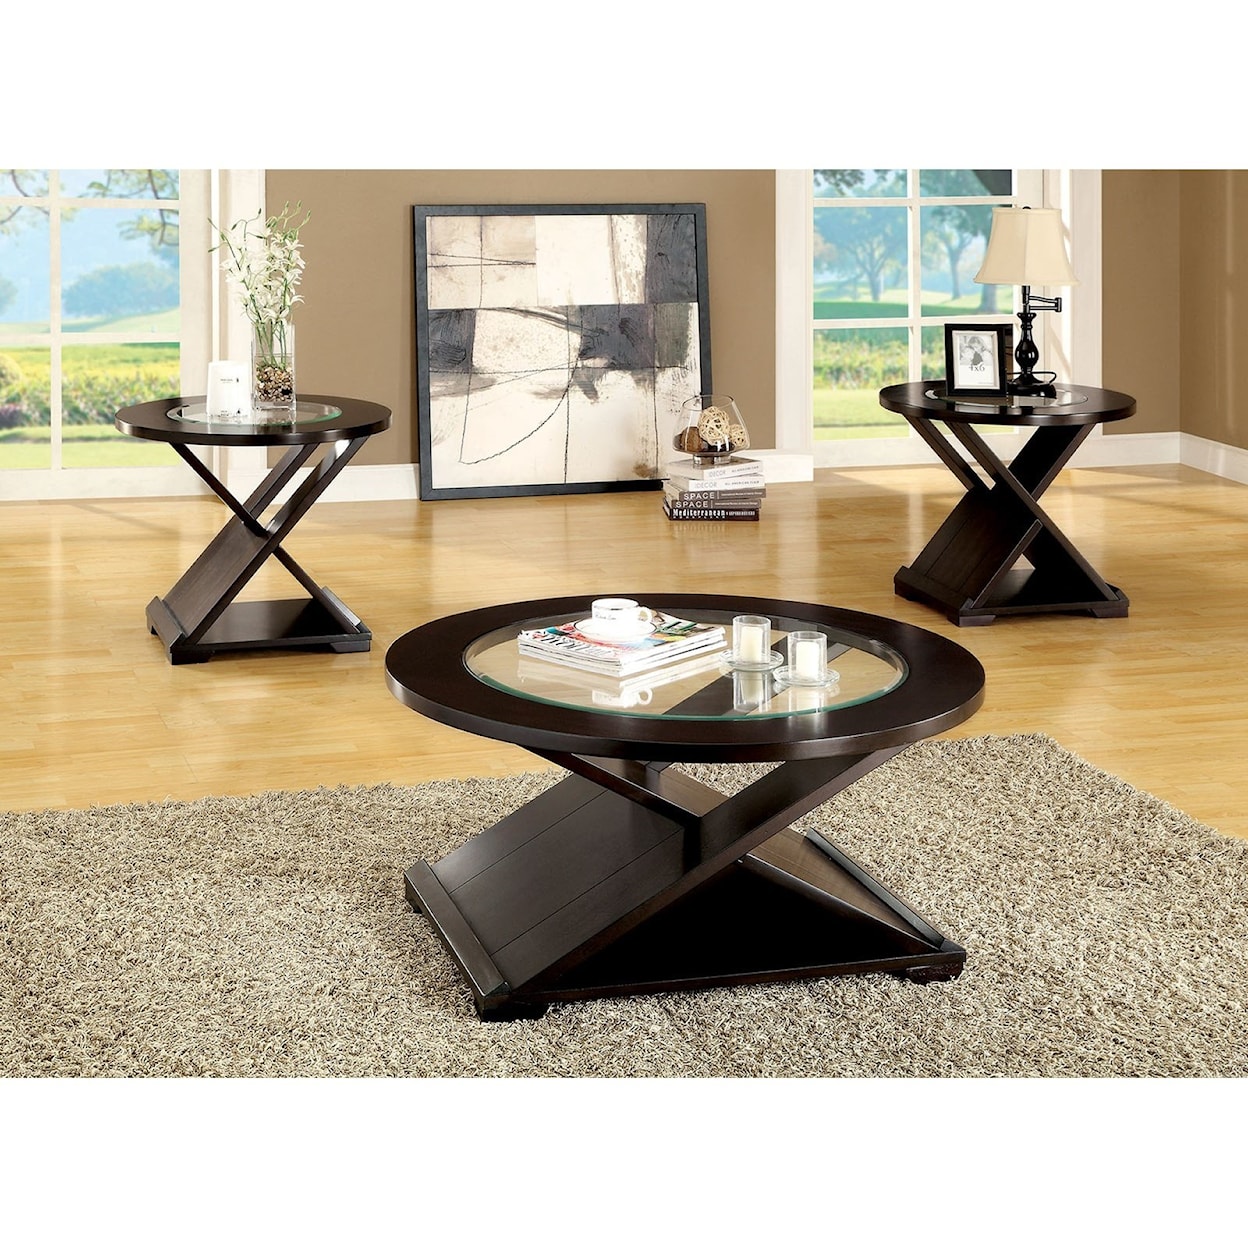 Furniture of America Orbe 3 Pc. Table Set